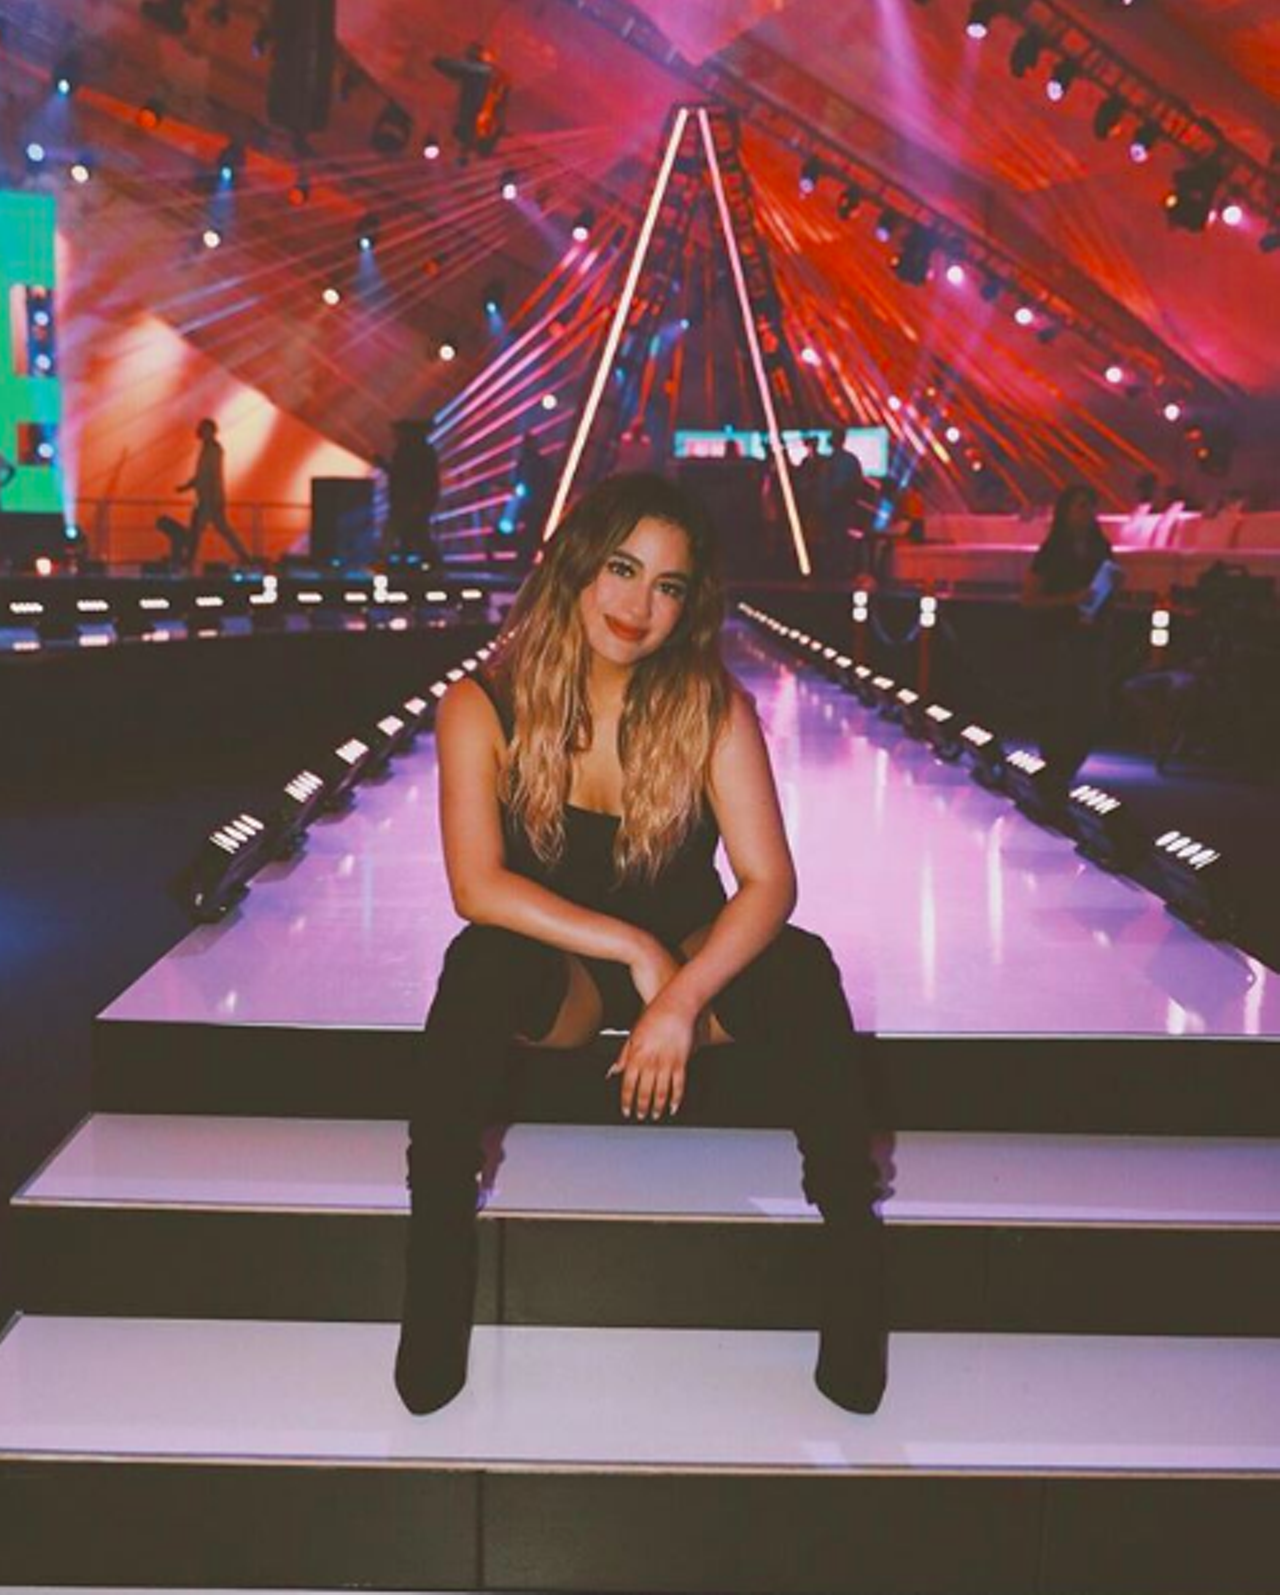 Ally Brooke
Fifth Harmony singer Ally Brooke was born Allyson Brooke Hernandez in San Antonio back in 1993. She attended Cornerstone Christian Elementary School and eventually got her diploma while being home-schooled.
Photo via Instagram / allybrooke